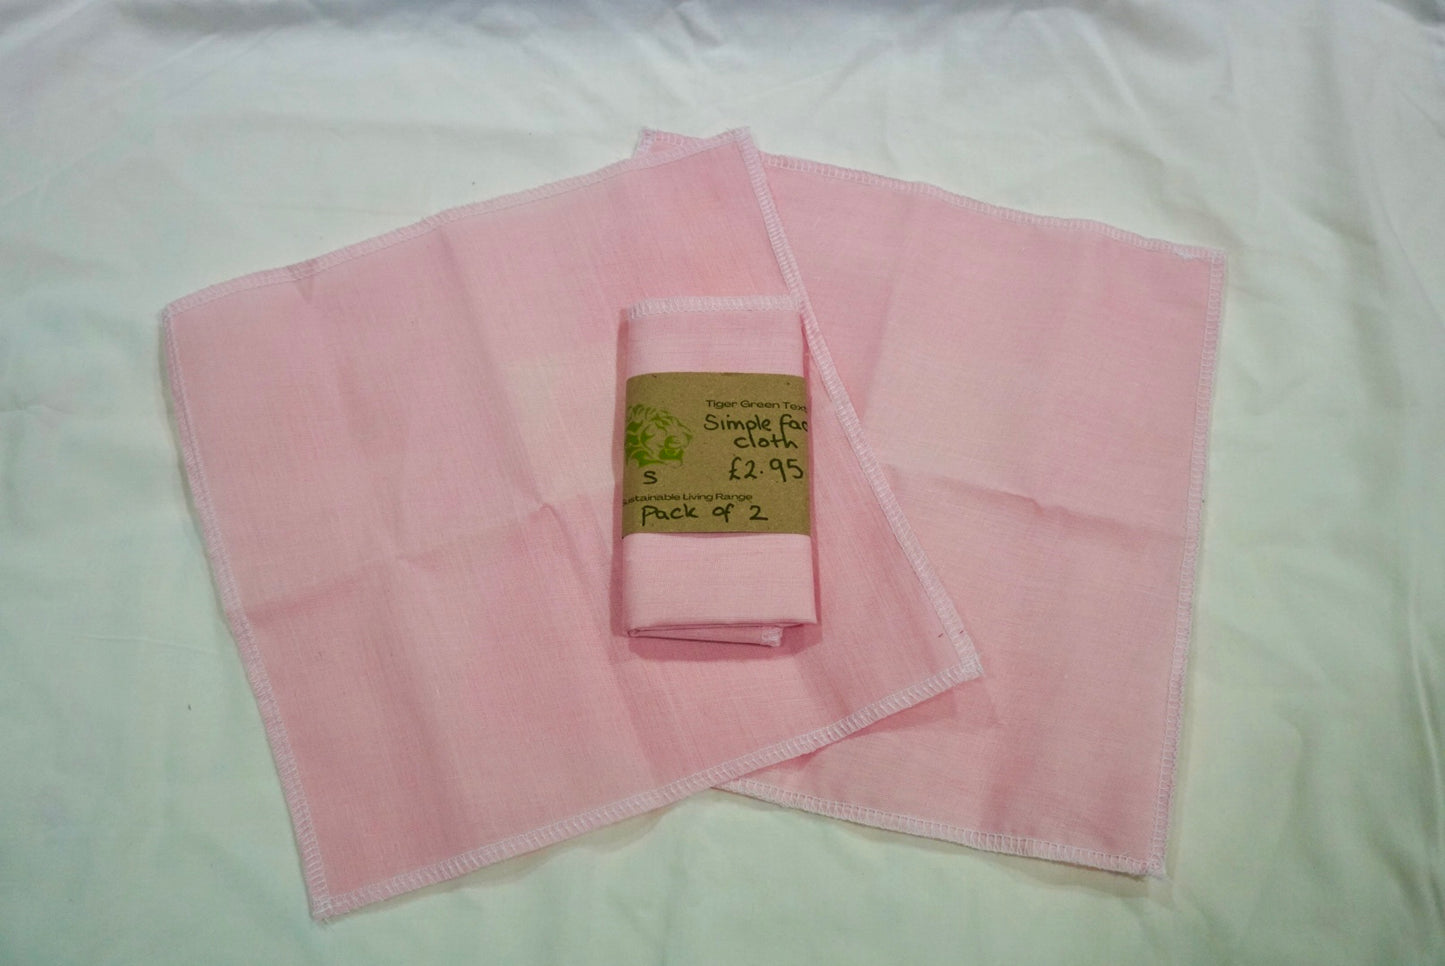 Simple Face Cloth - 2 Pack